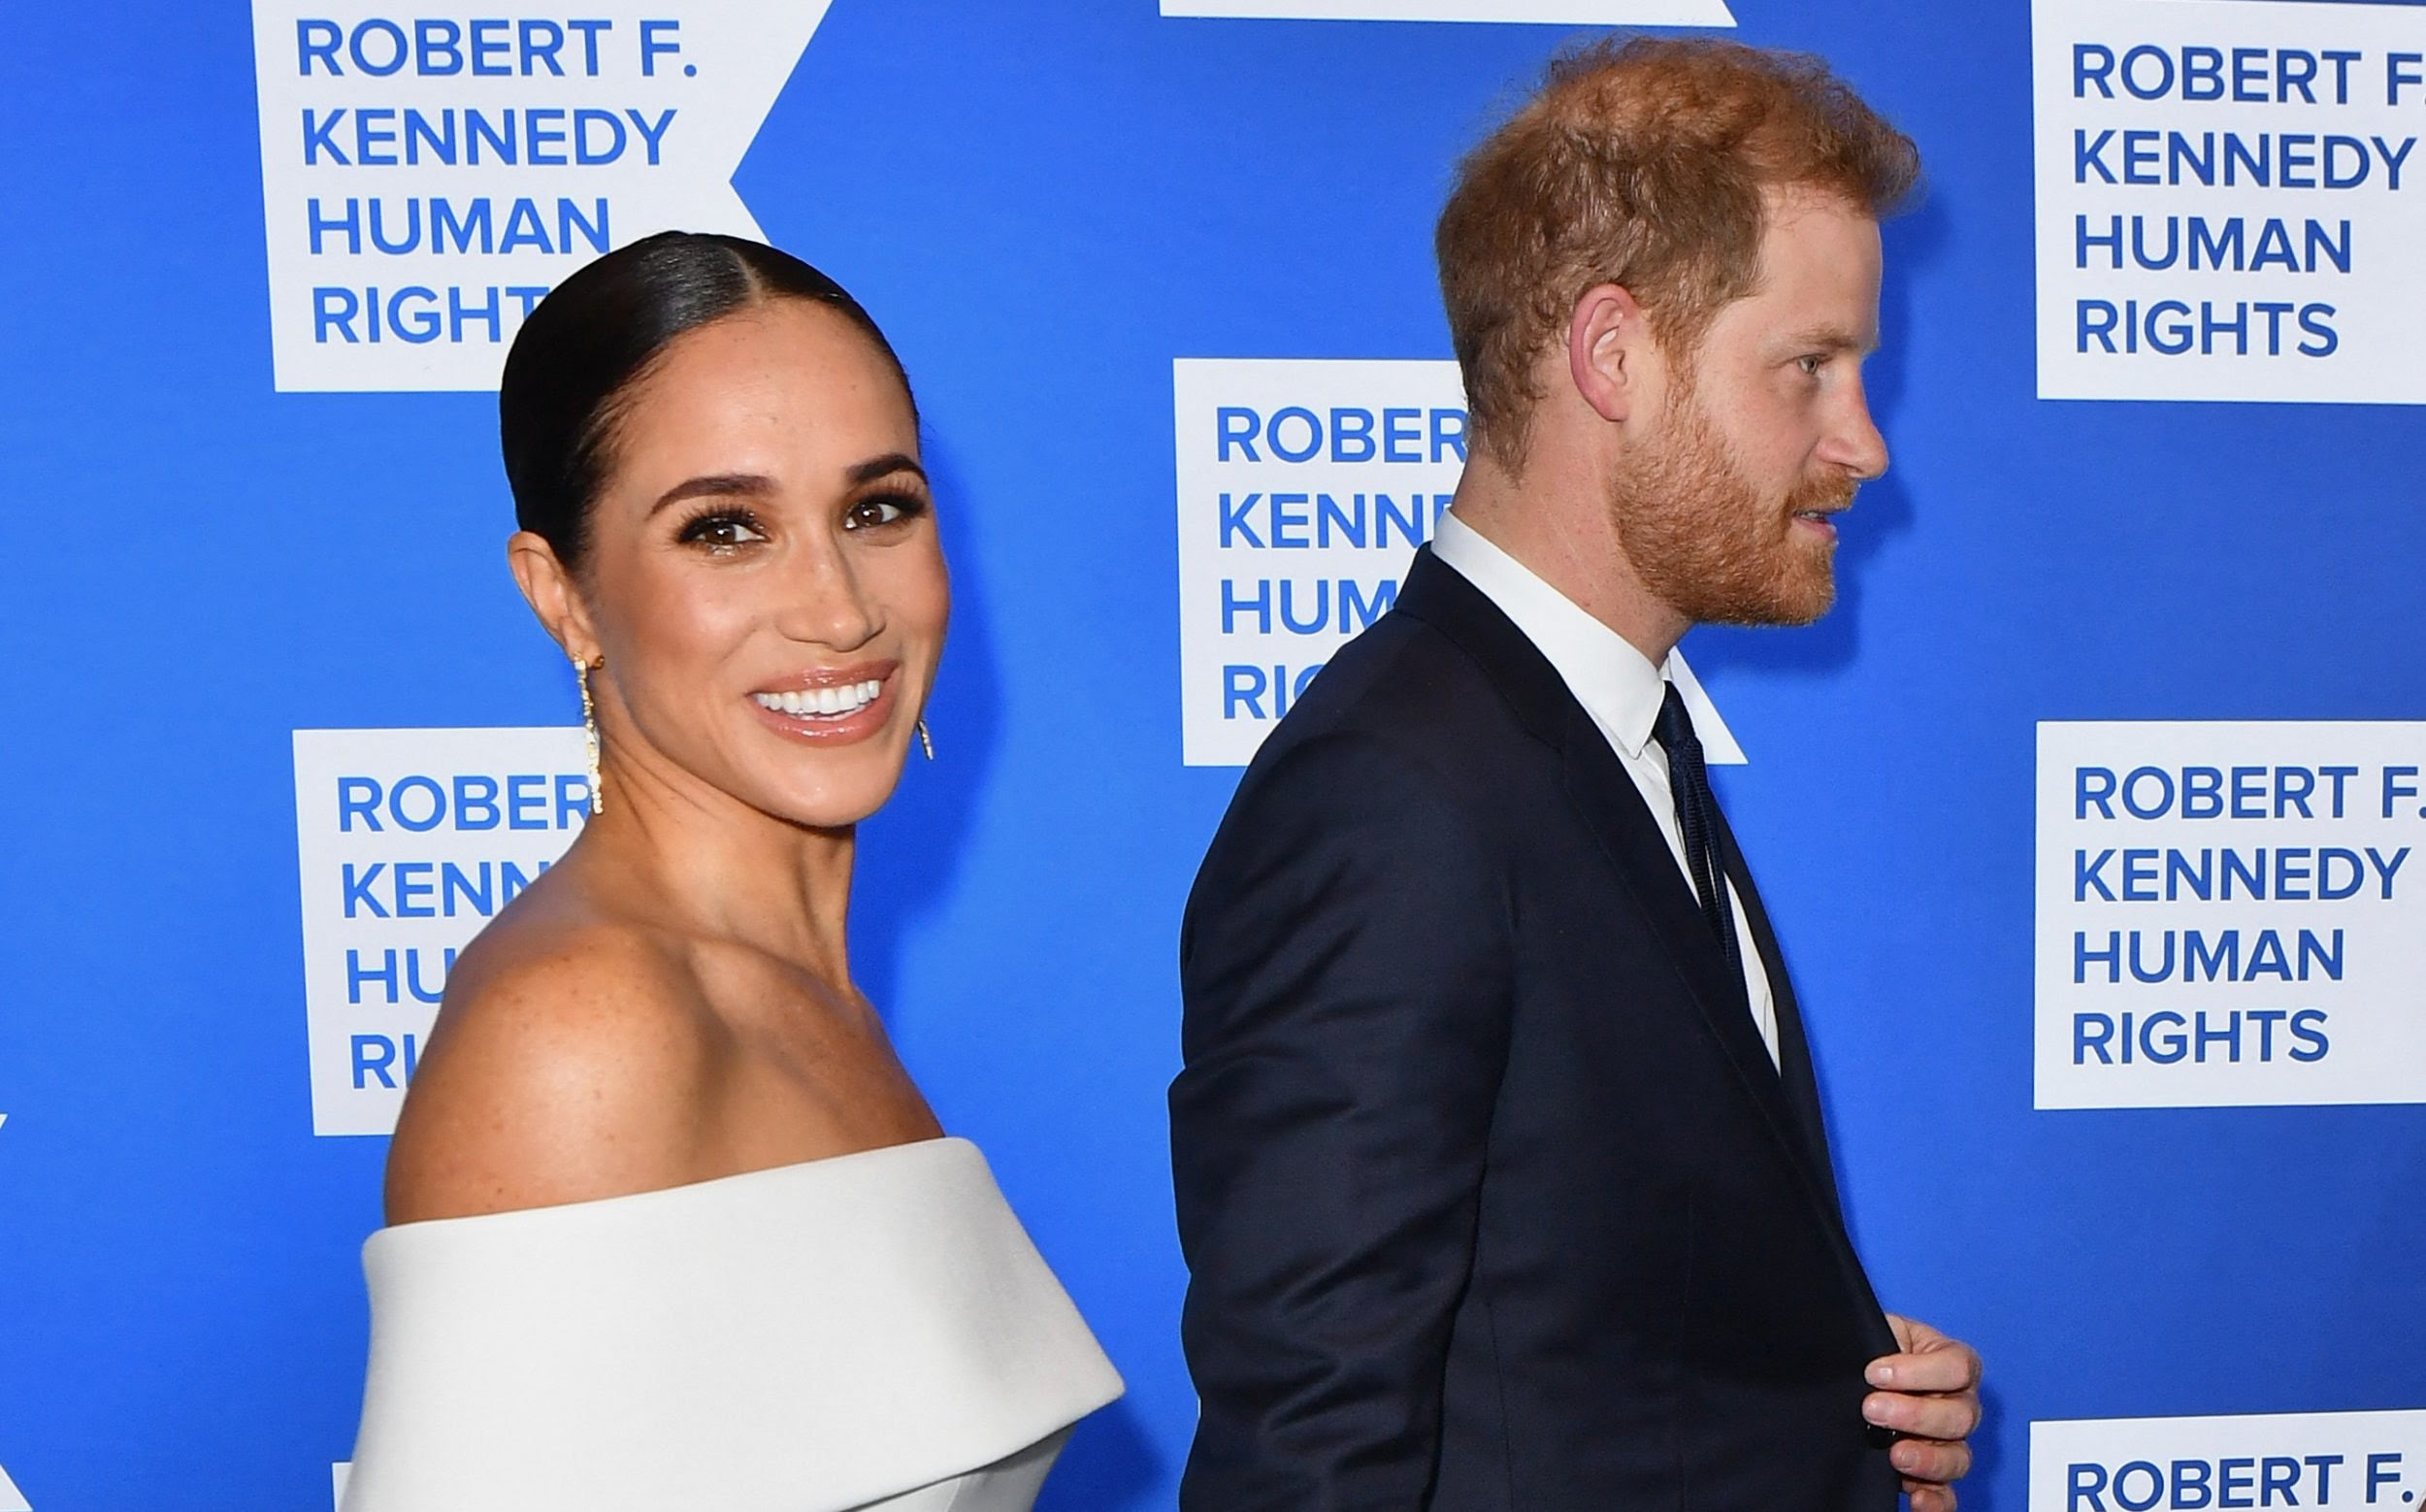 The Sussexes at the Robert F Kennedy human rights awards. Meghan smiles at the camera